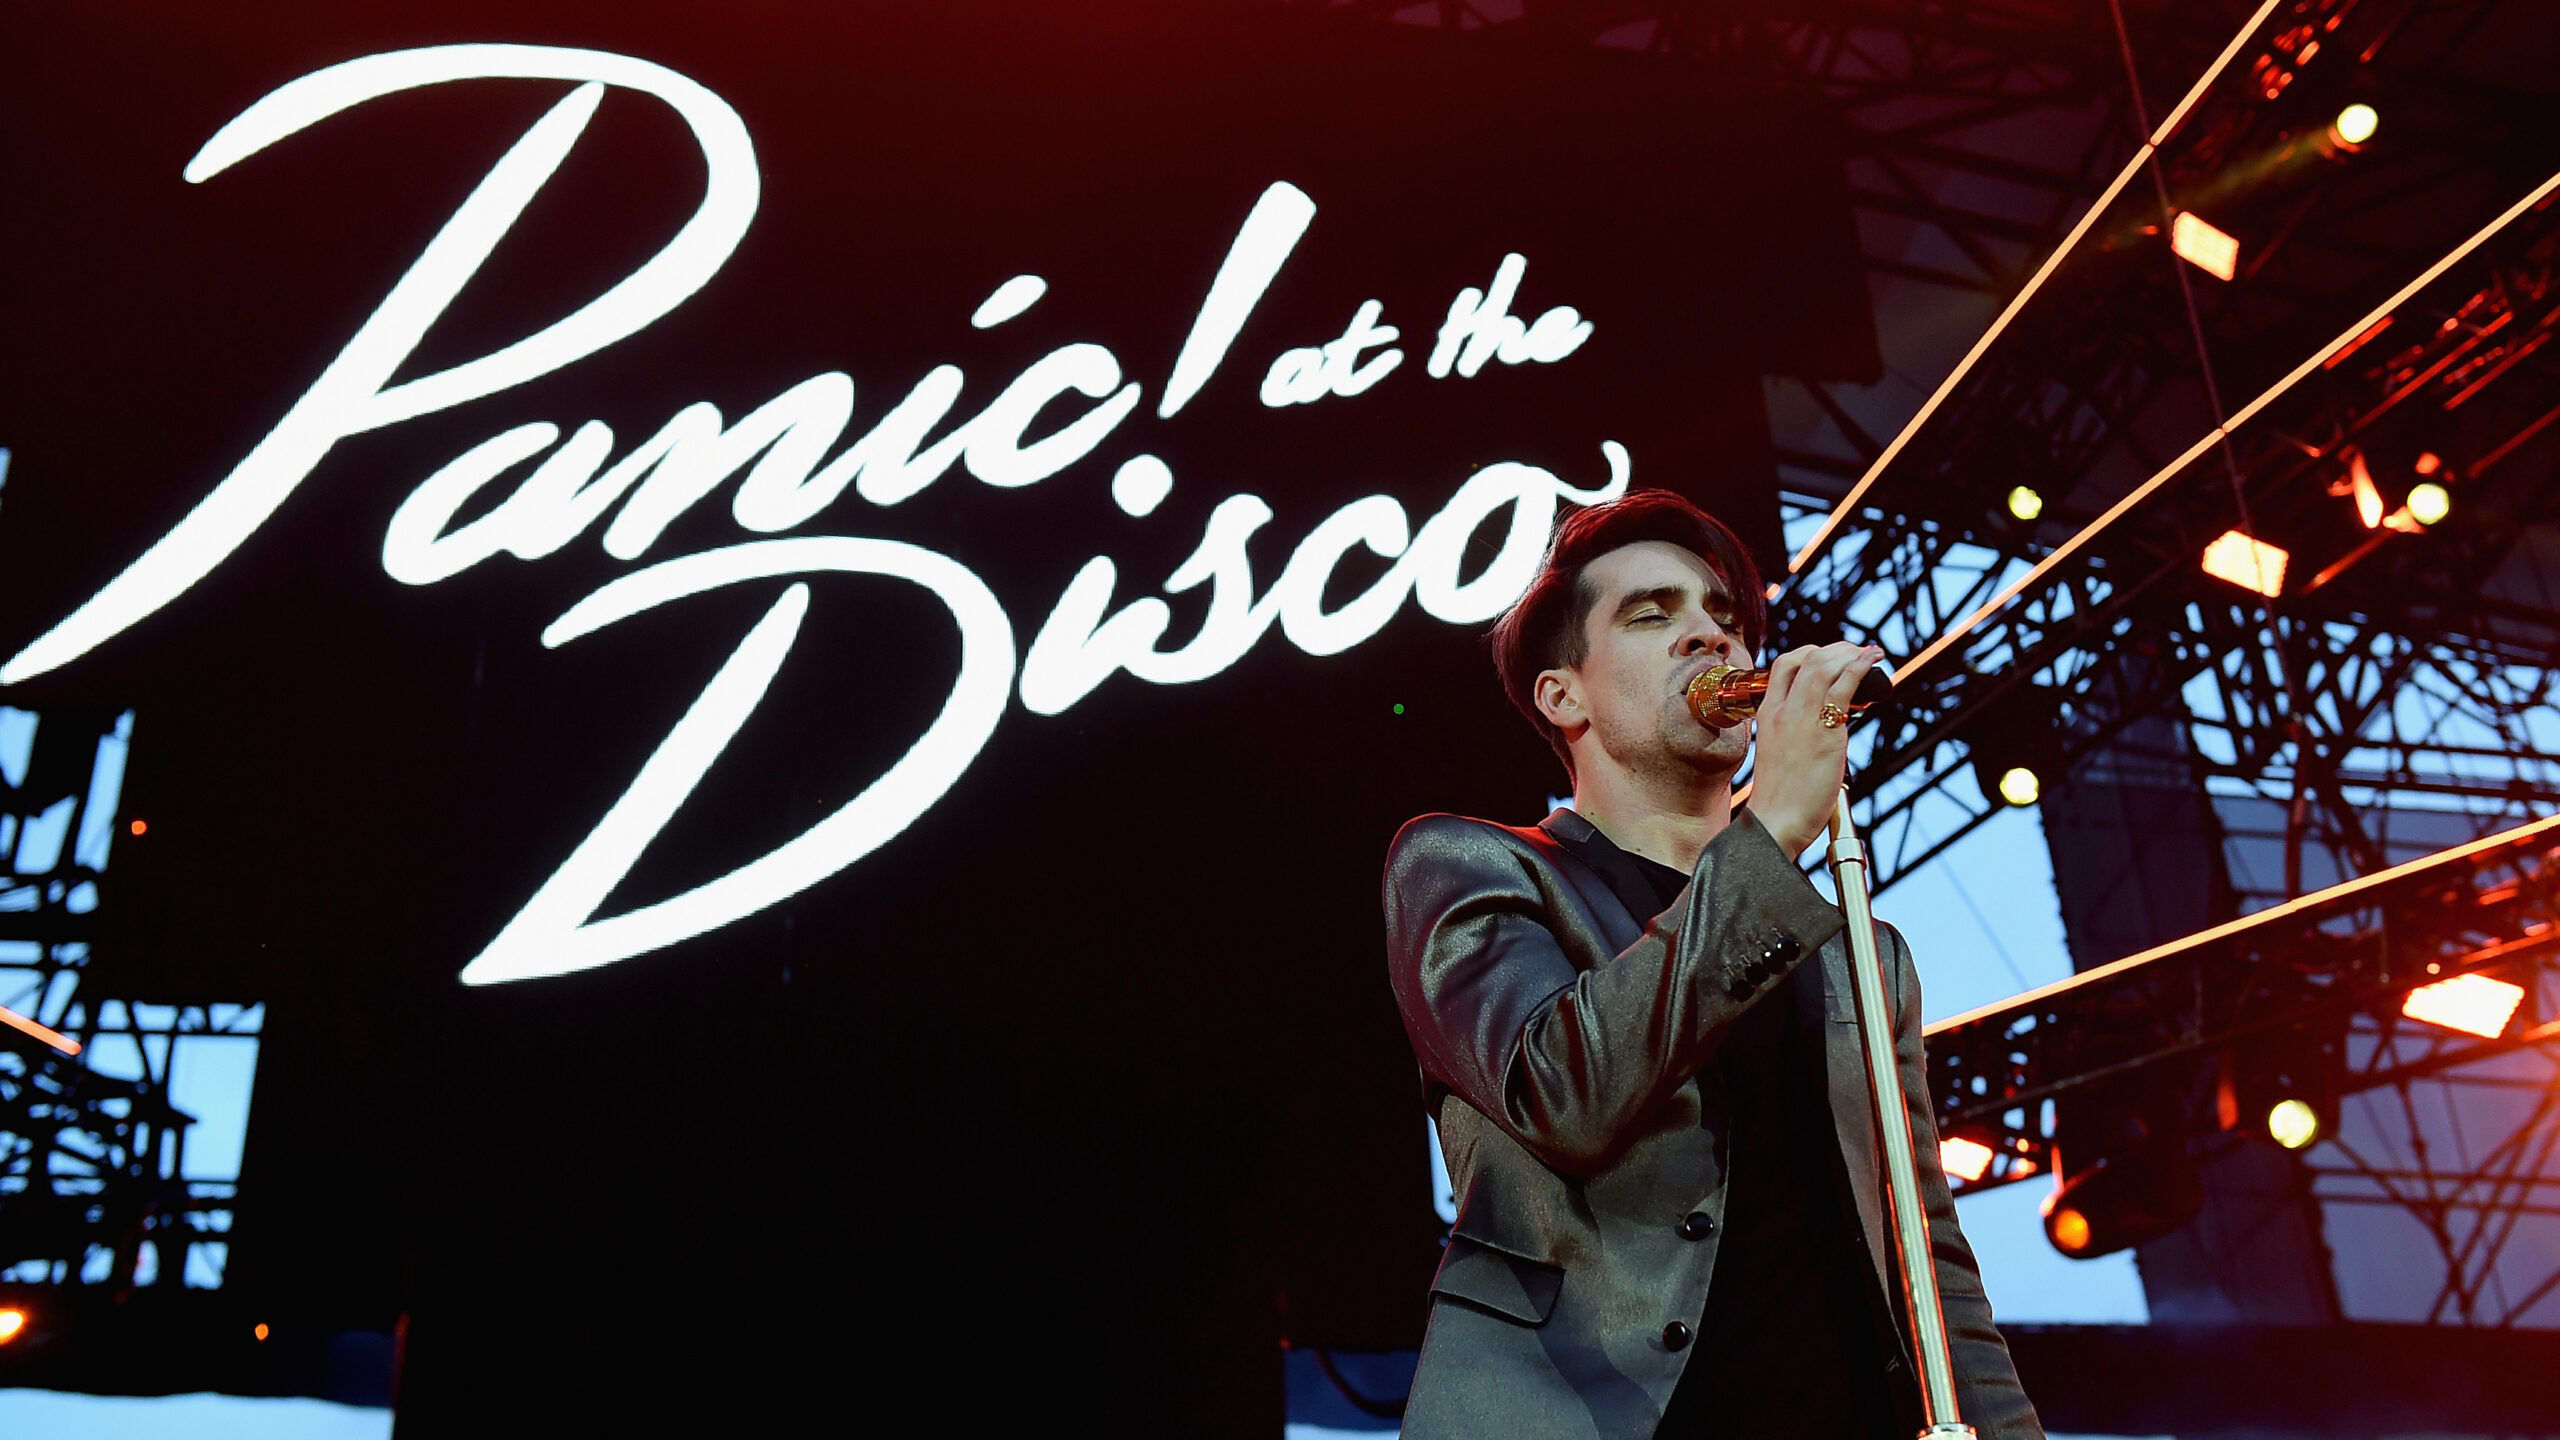 gettyimages 531452182 wide 2ad5157812afc787332fb95552b9d5f4e9e898dc scaled https://rexweyler.com/panic-at-the-disco-will-split-after-spring-european-tour-announces-lead-singer-brendon-urie/